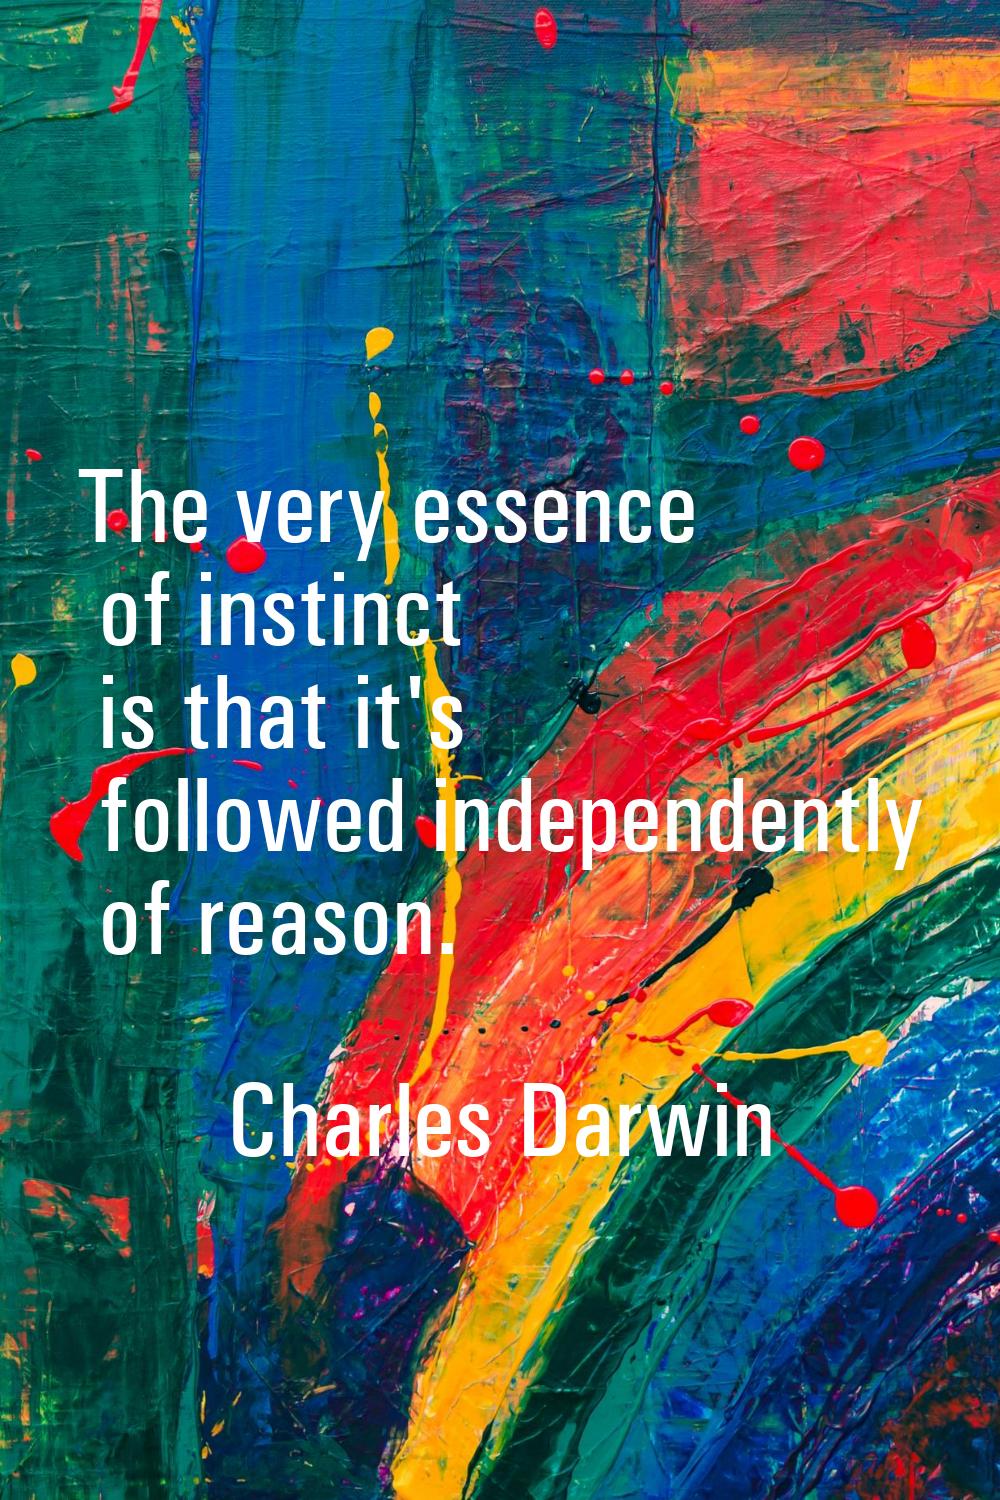 The very essence of instinct is that it's followed independently of reason.